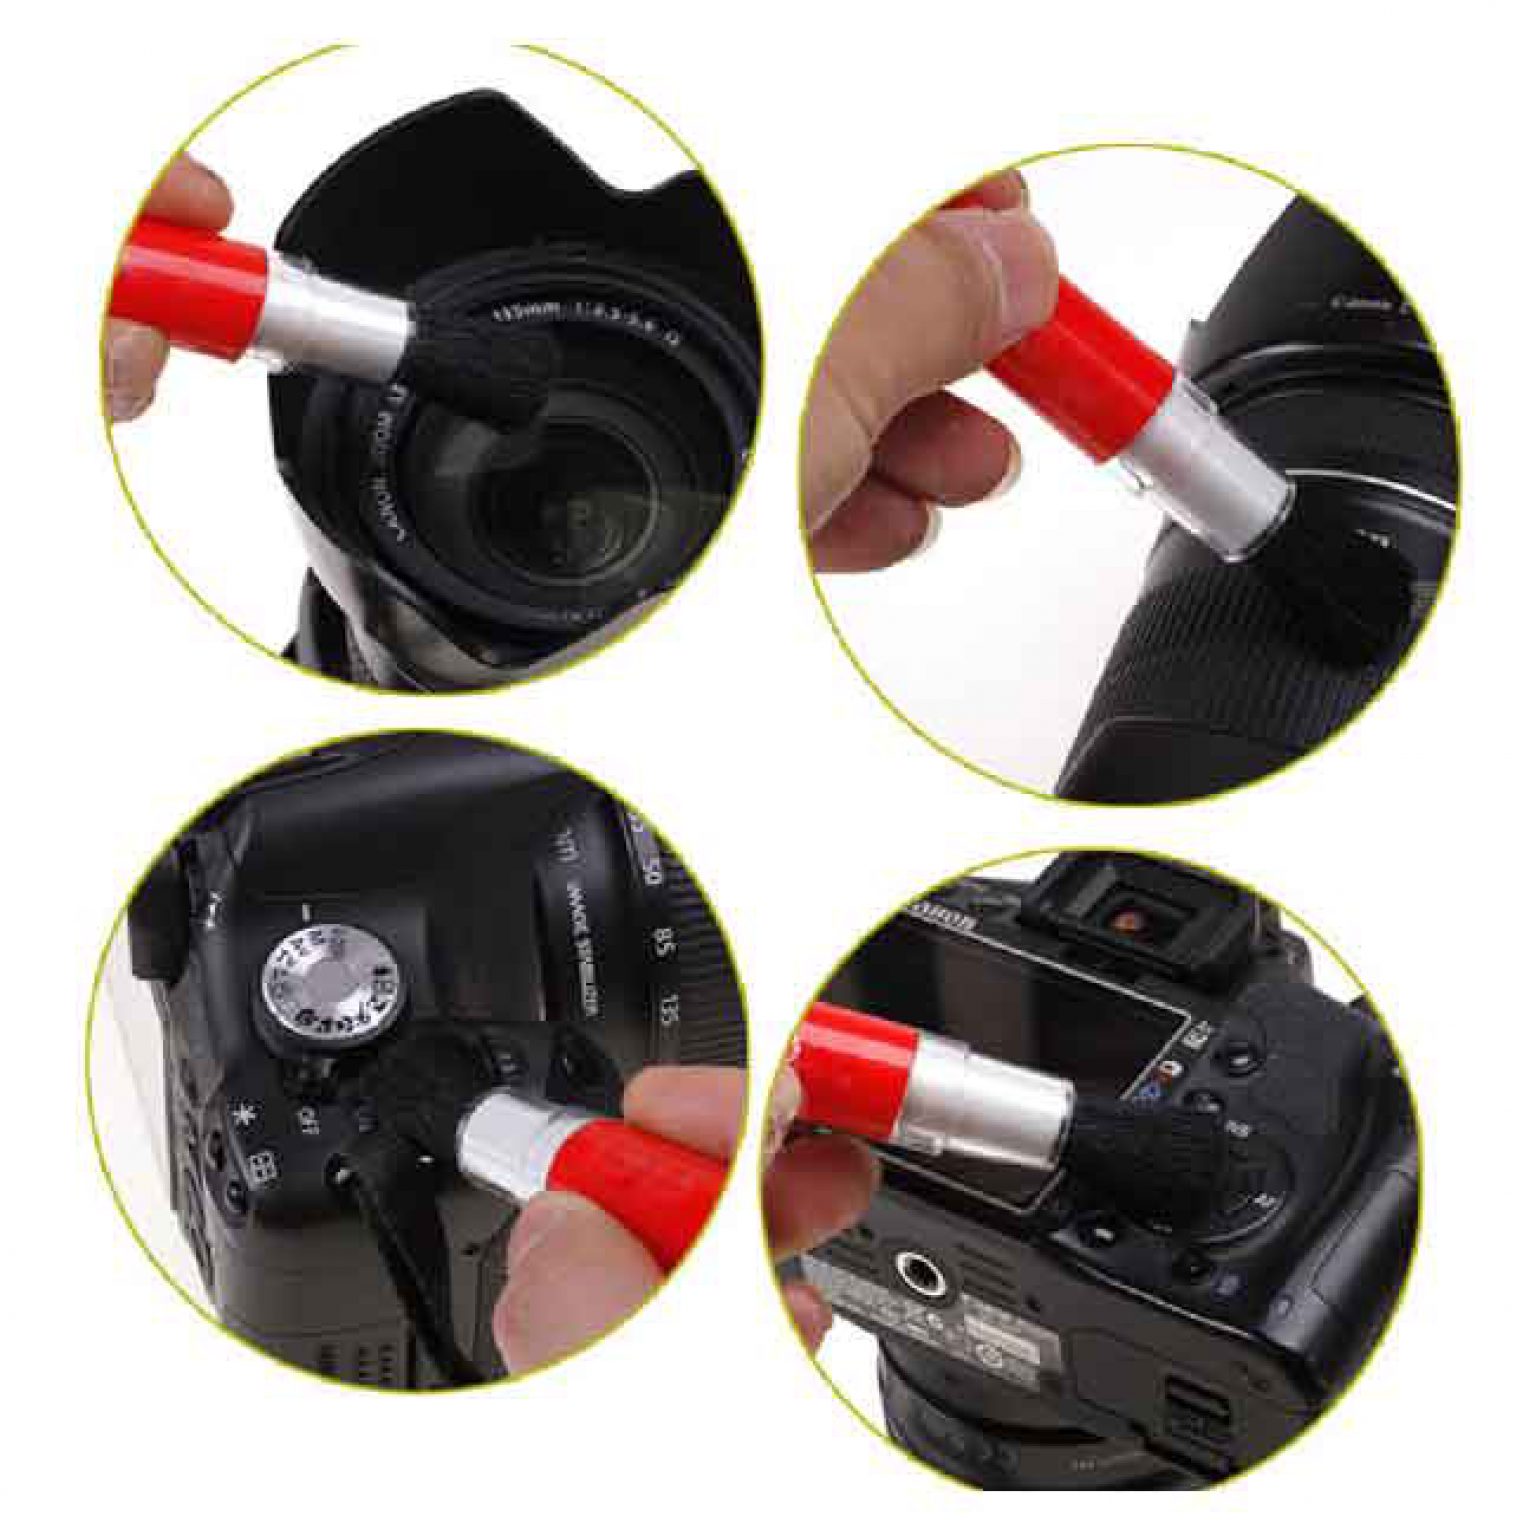 Canon Lens Cleaning Kit8